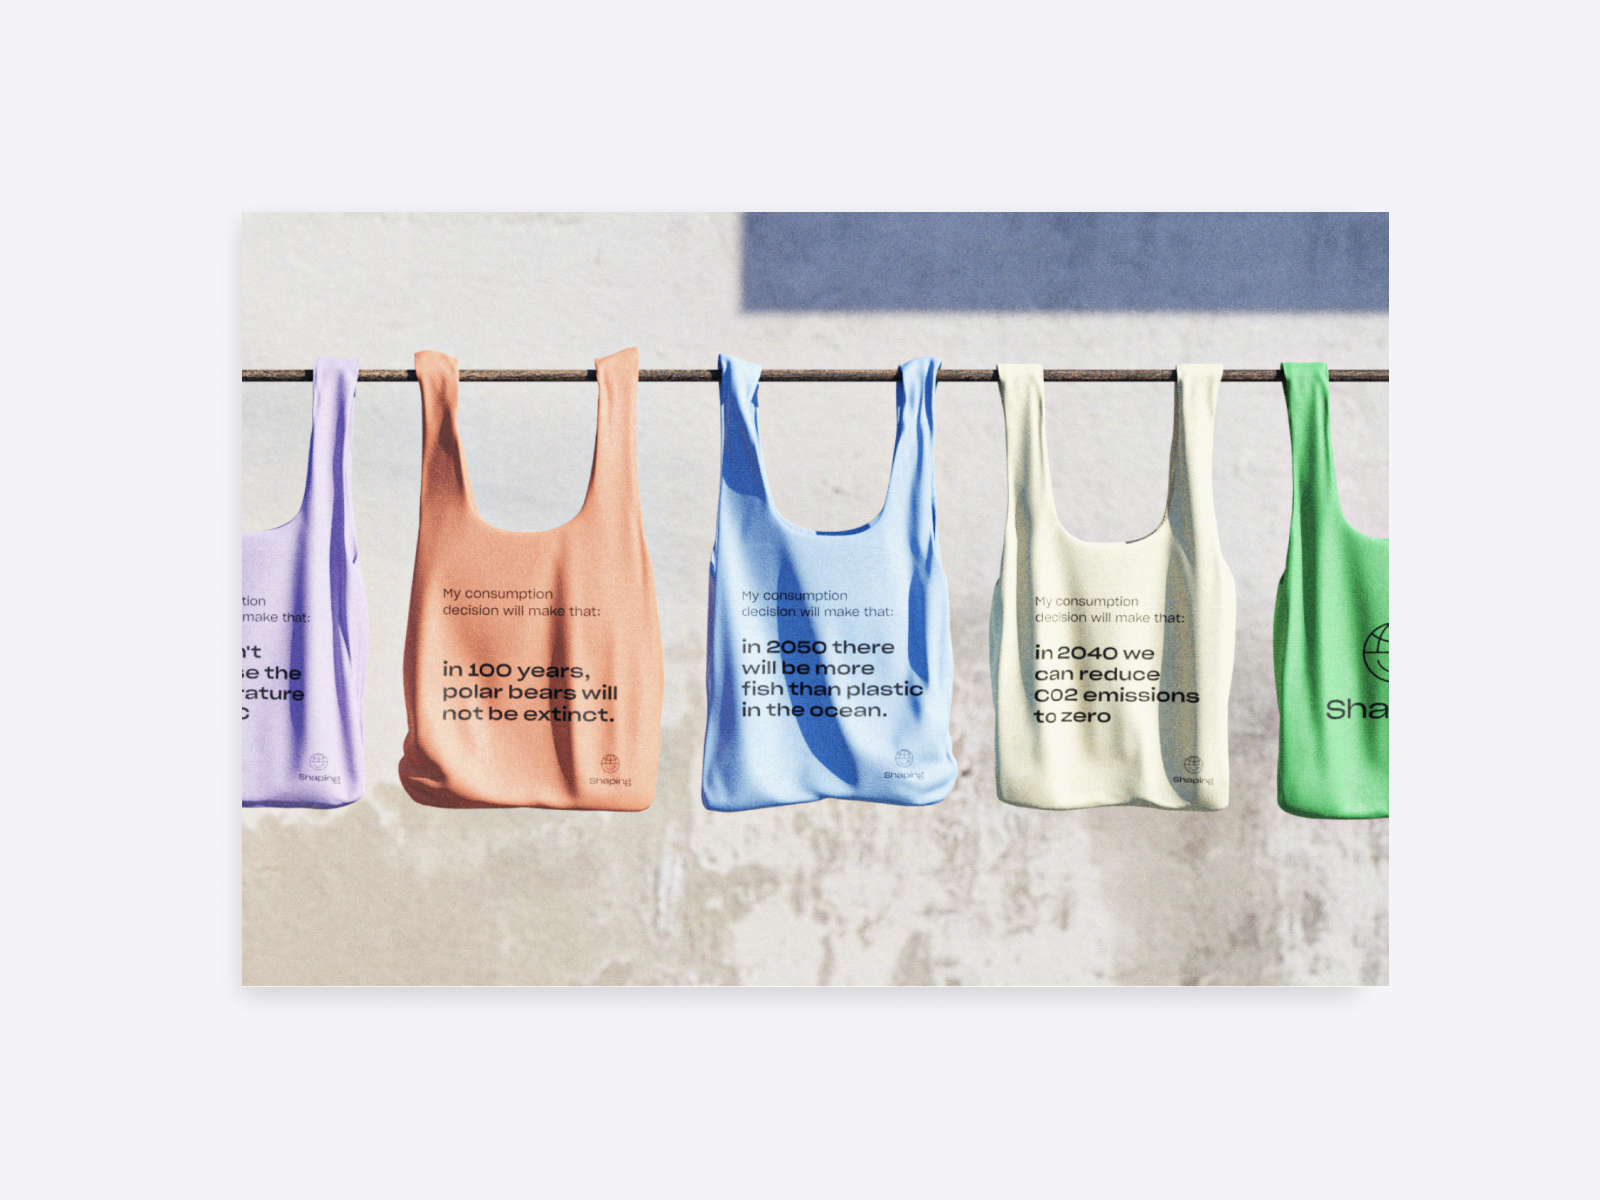 Sustainable bag design, with bags in different colors